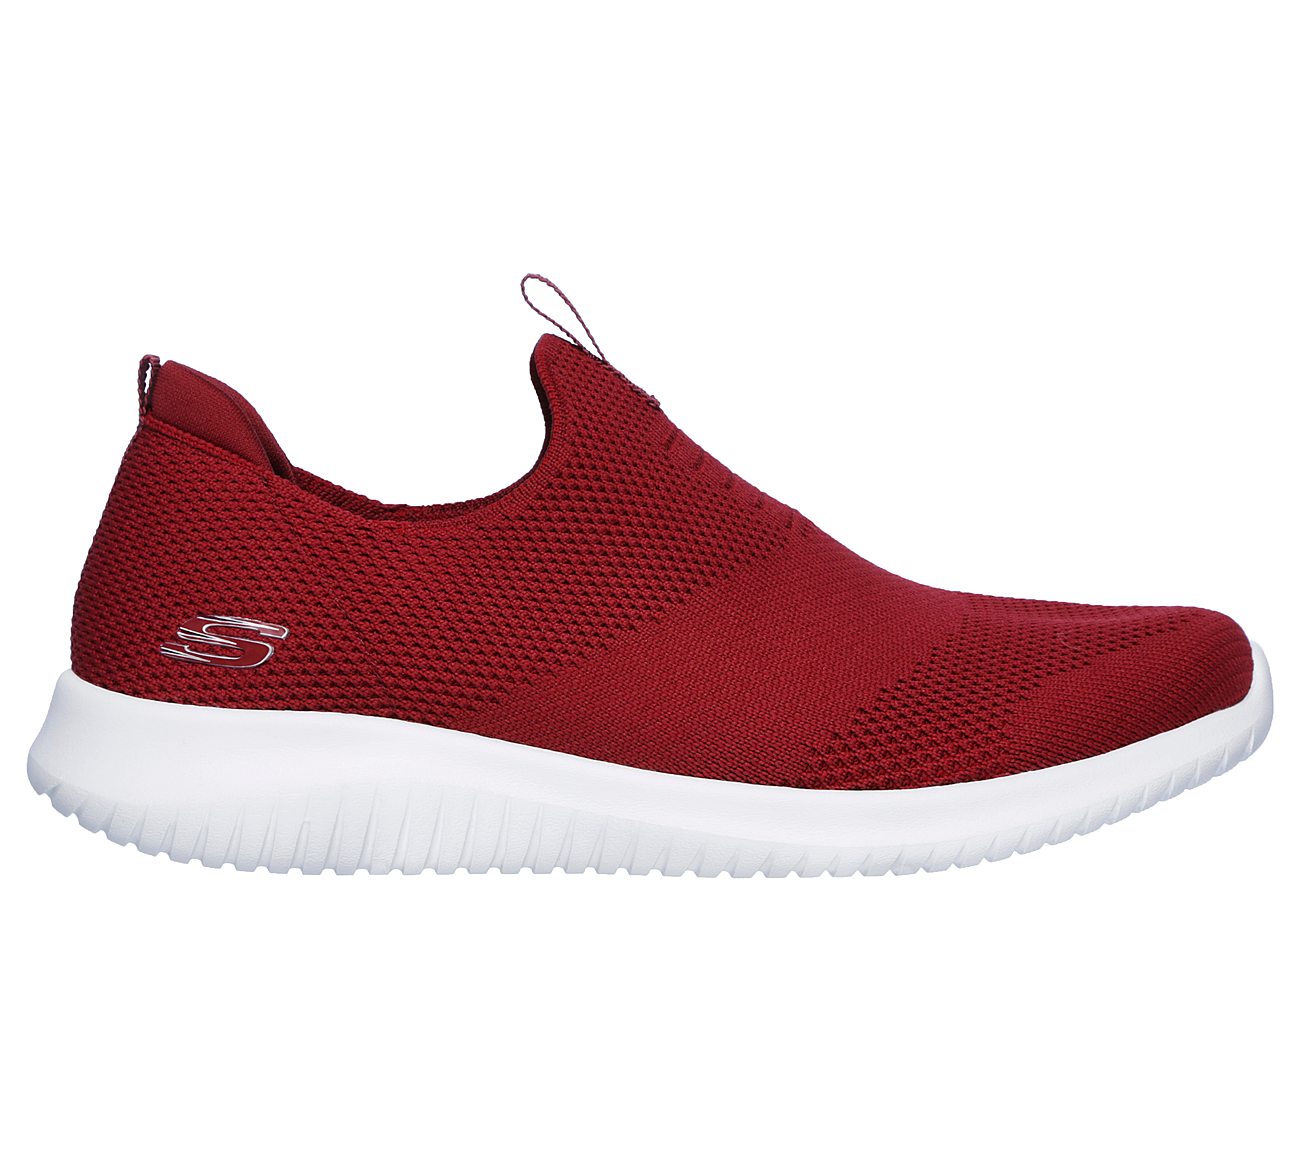 stretch knit shoes by skechers